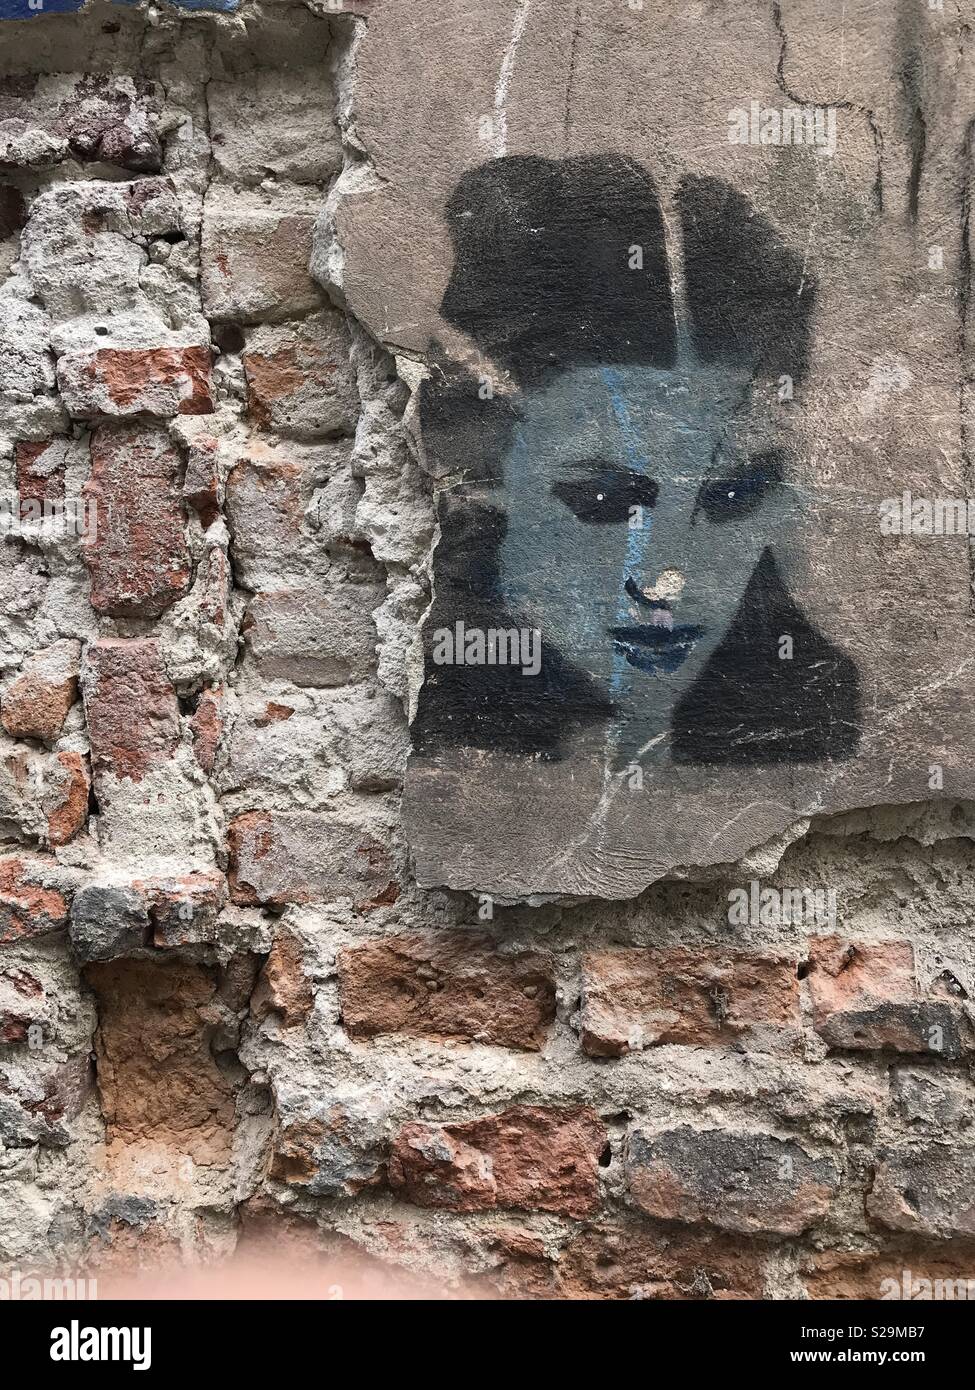 Black and white stencil art depicting the portrait of a young lady, on a crumbling brick wall with concrete render, located in the Polish city of Kraków. Stock Photo